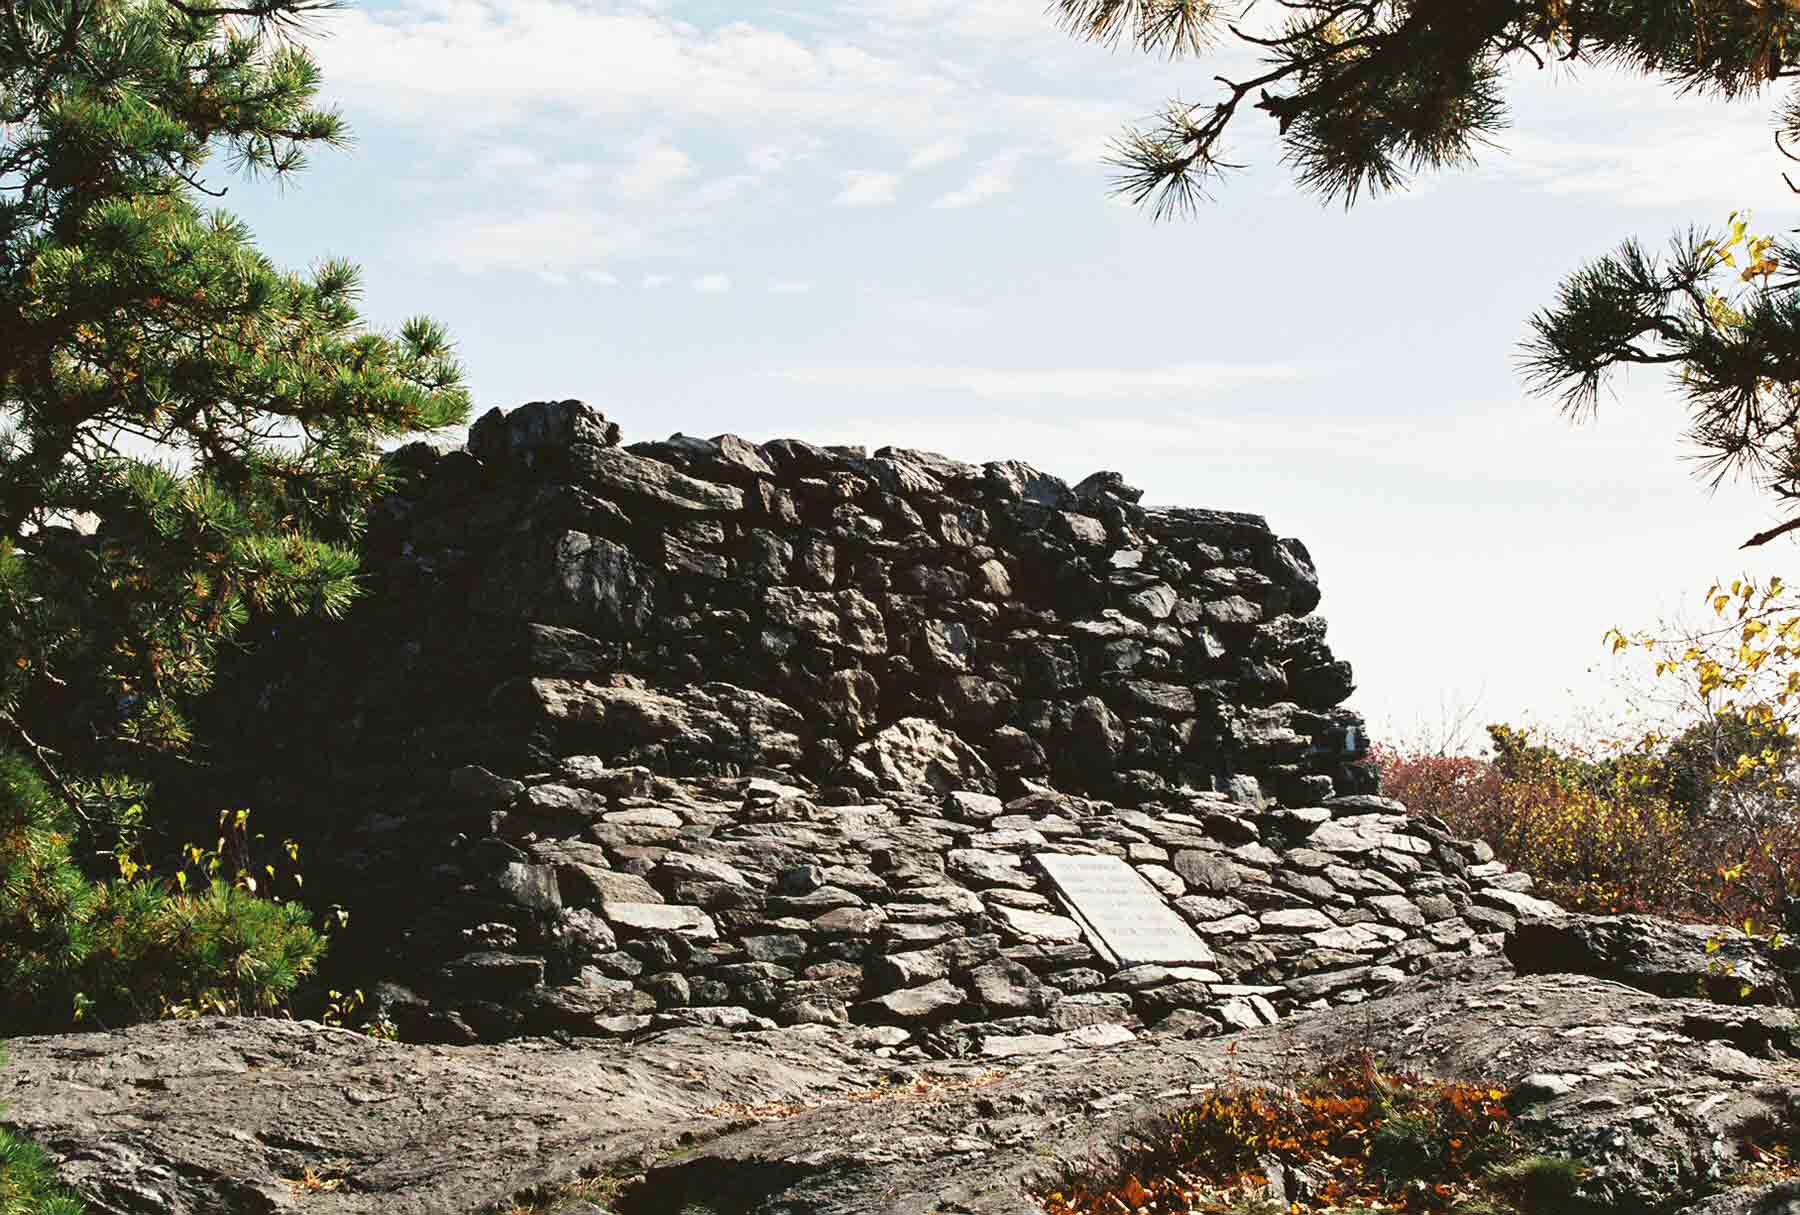 mm 1.4 - The monument at the summit of Bear Mt. This was at one time much higher. At the time it was built,  Bear Mt. was believed to be the hghest point in CT. It is the highest peak but not the highest point (see previous picture). Courtesy dlcul@conncoll.edu